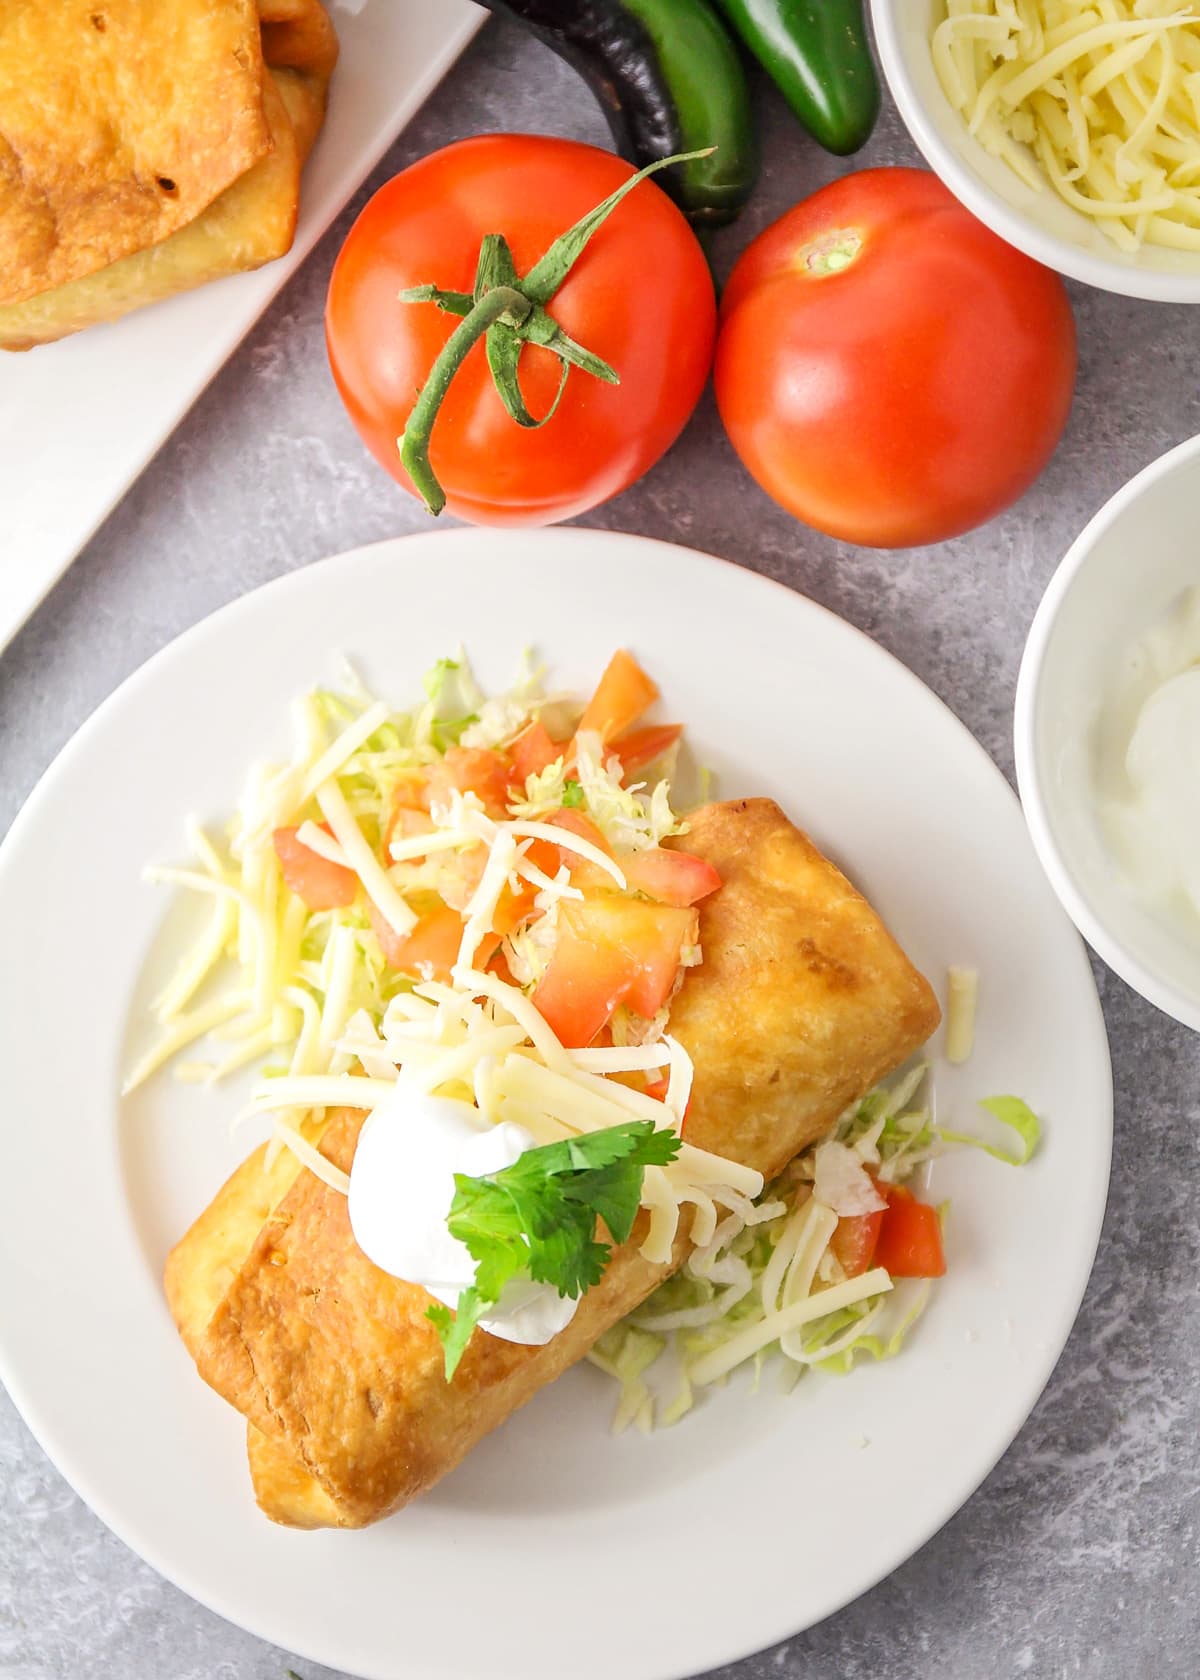 Chimichanga recipe garnished with cheese and served on a white plate.